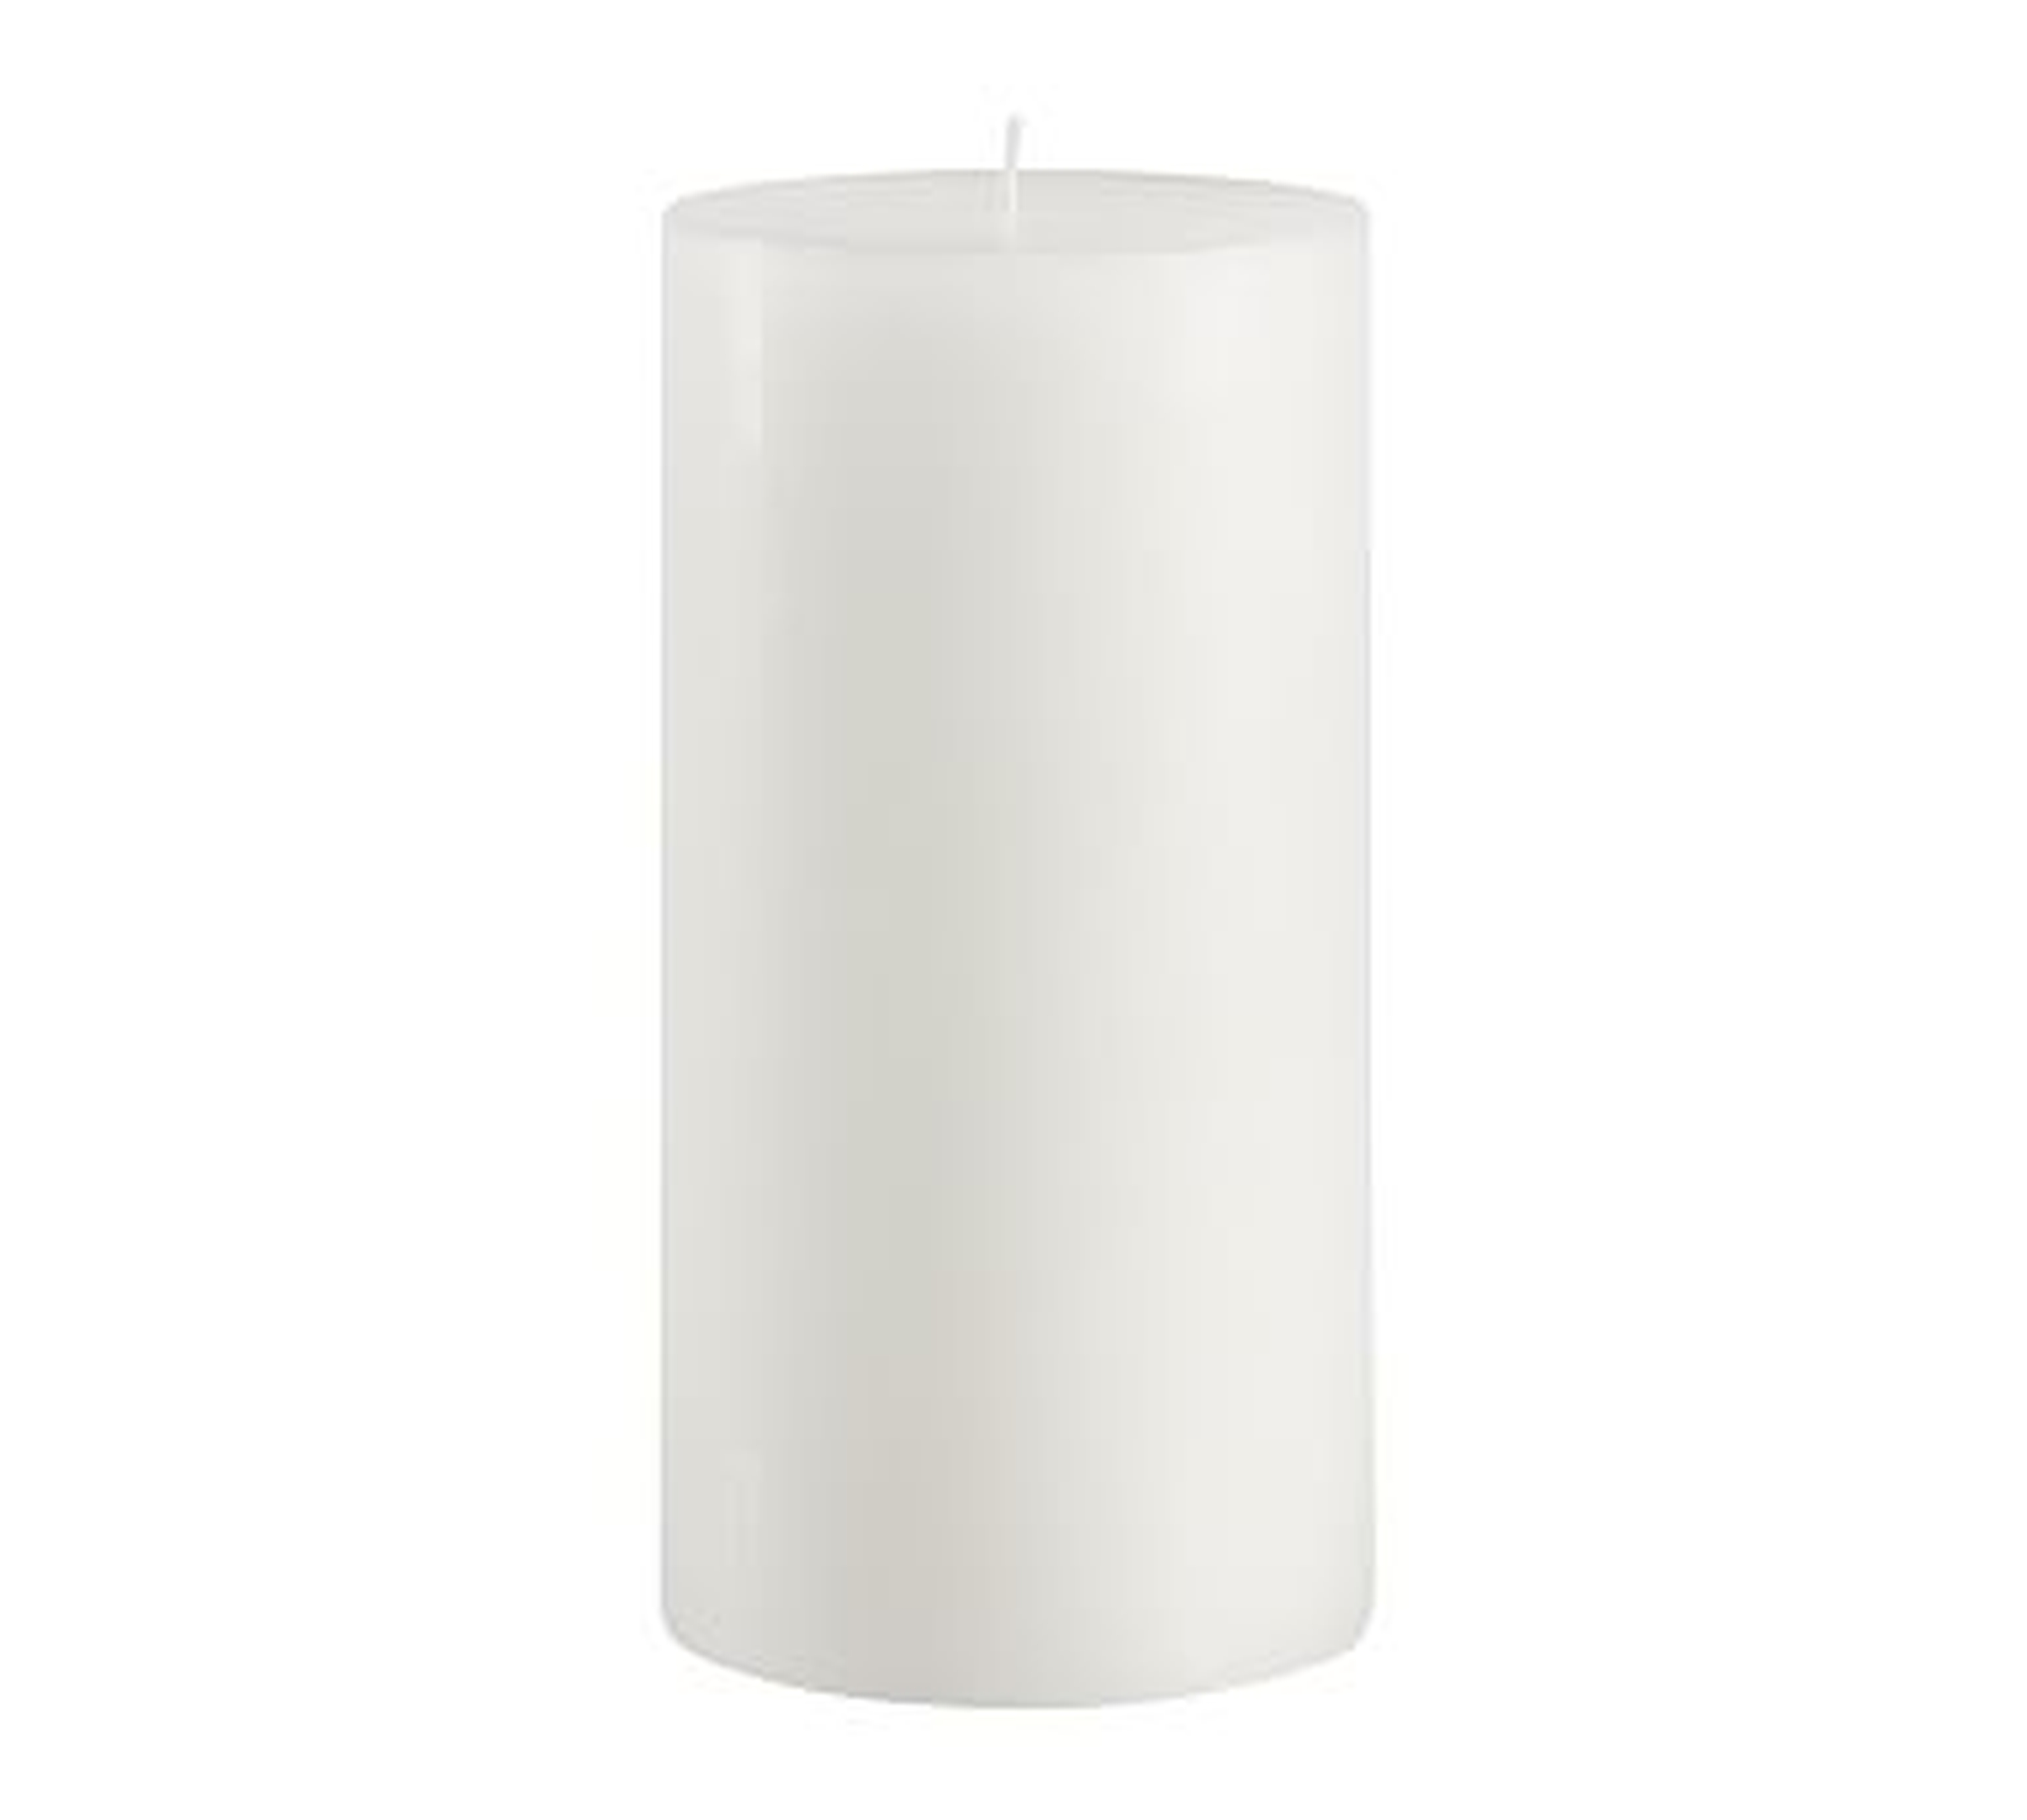 Unscented Wax Pillar Candle, 4"x8" - White - Pottery Barn